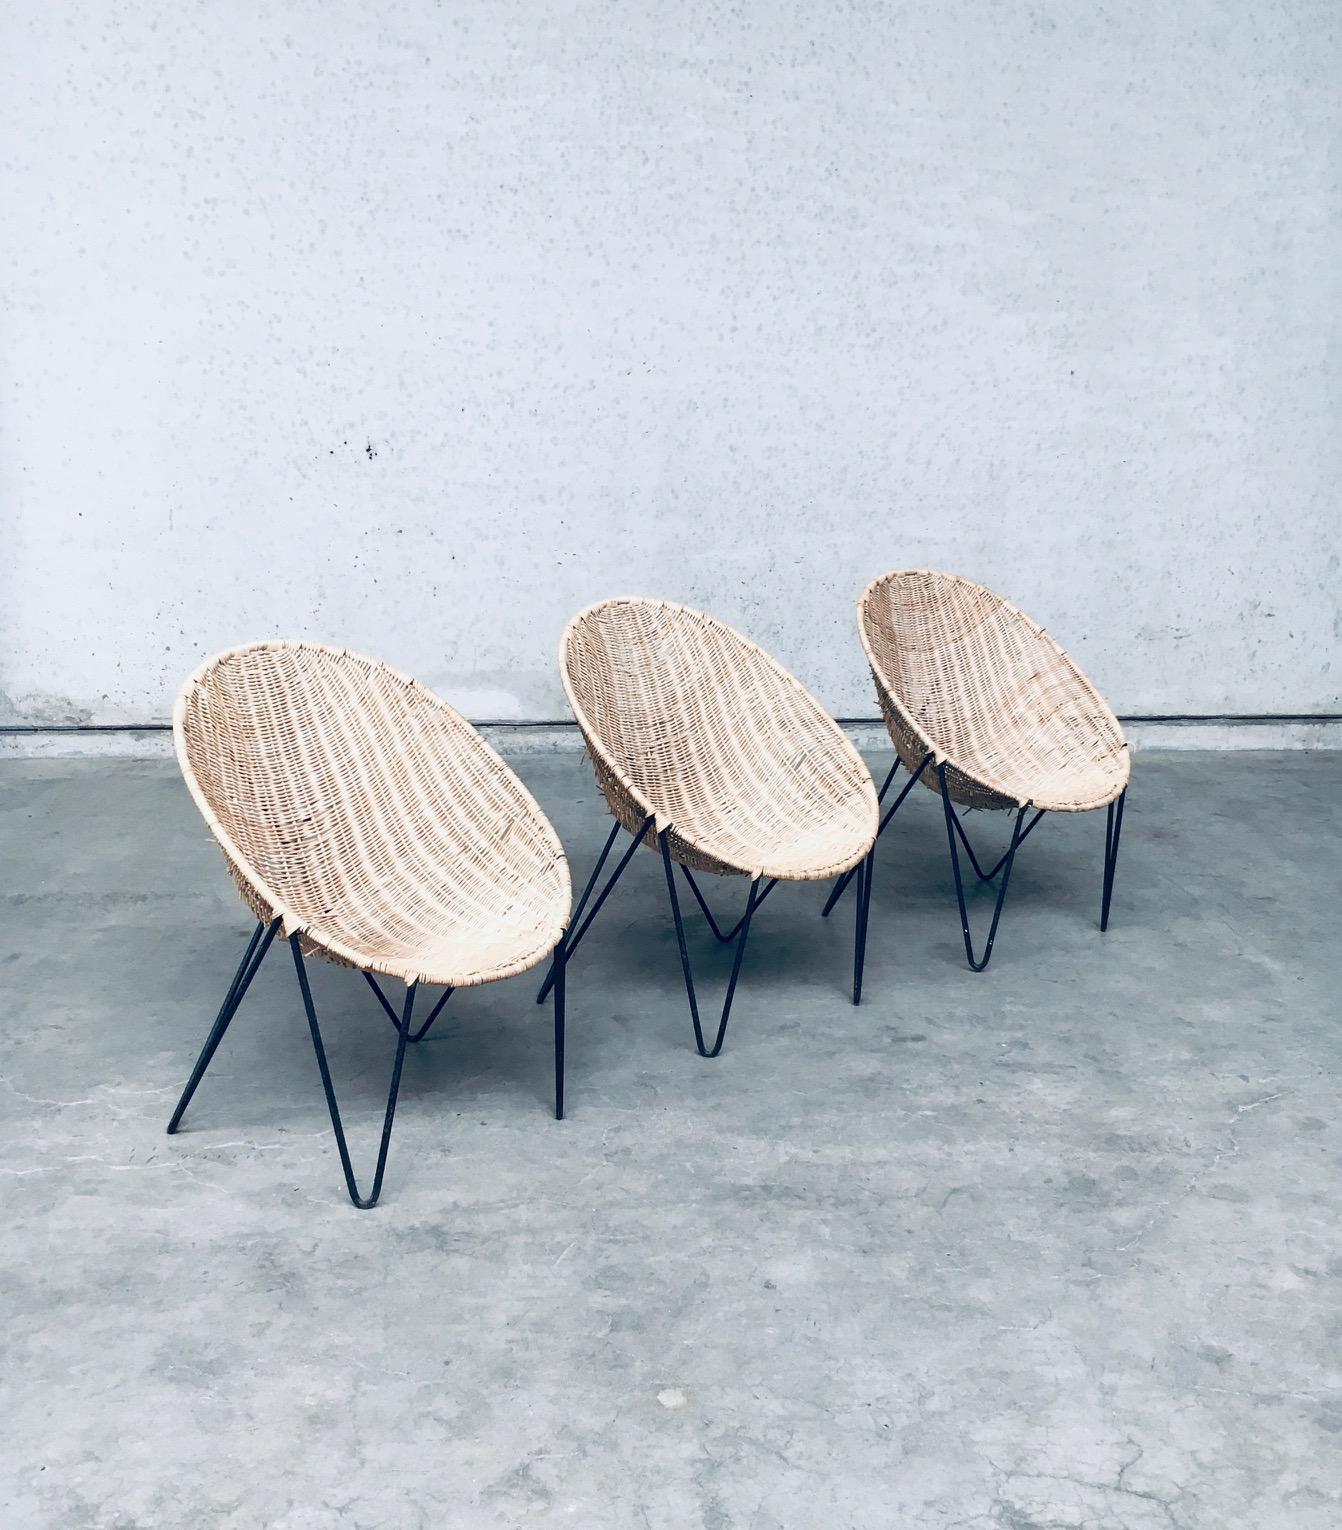 Vintage Midcentury Modern Italian Design 'EGG Basket' Wicker Chair set of 3. Made in Italy, 1950's period. In the style of Roberto Mango. Wicker / Rattan / Cane woven basket shape seats on tripod bend black metal frame. Very nice designed chairs